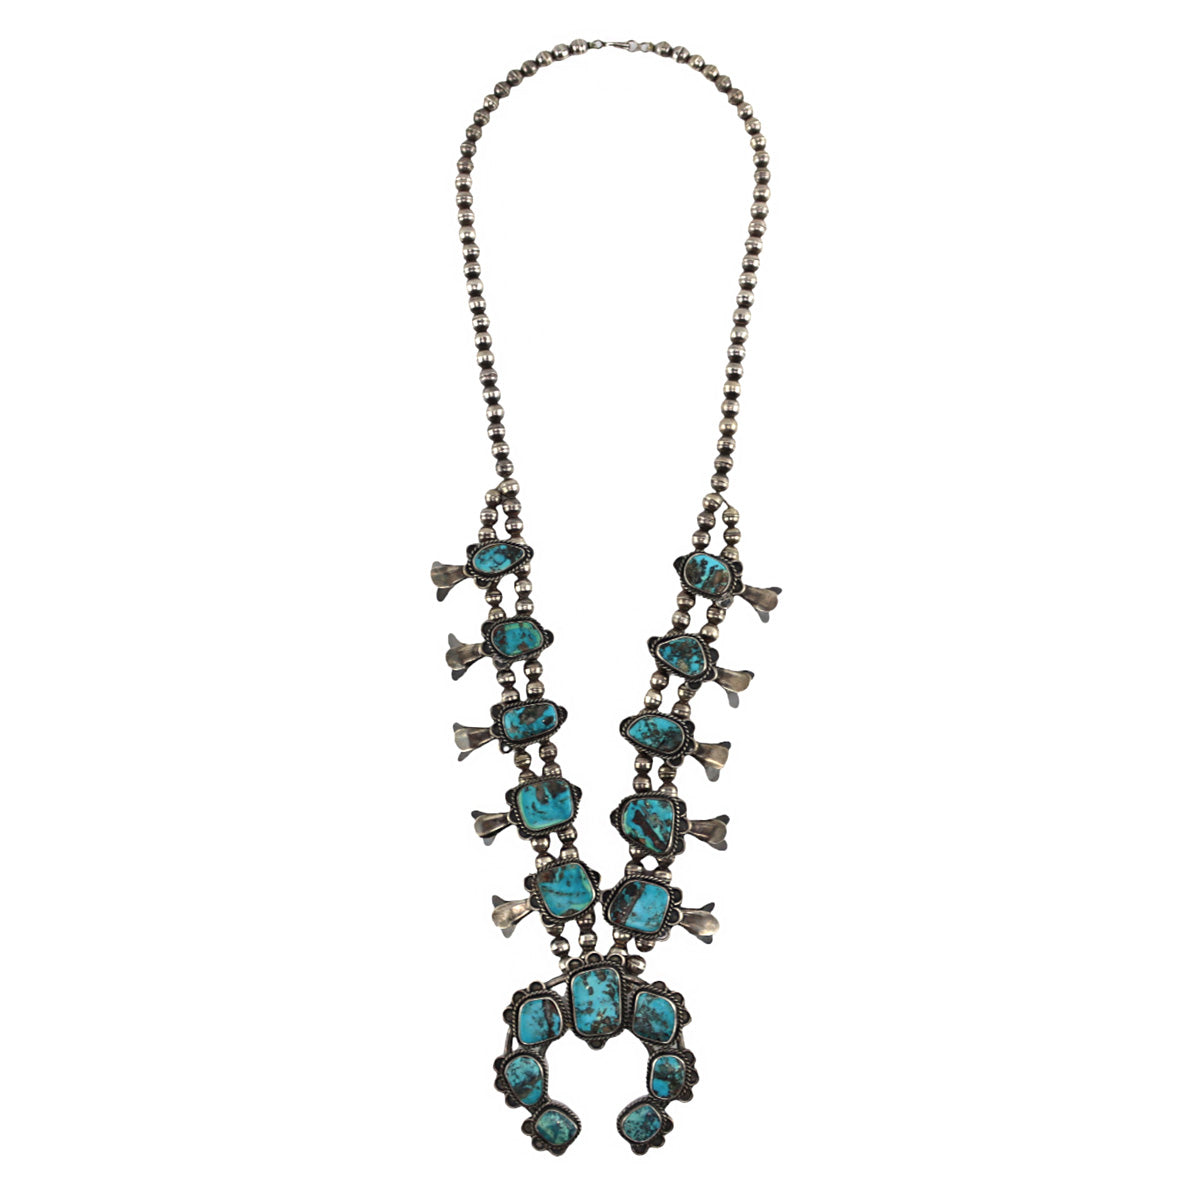 Navajo - Turquoise and Silver Squash Blossom Necklace c. 1988, 30" length (J16081)